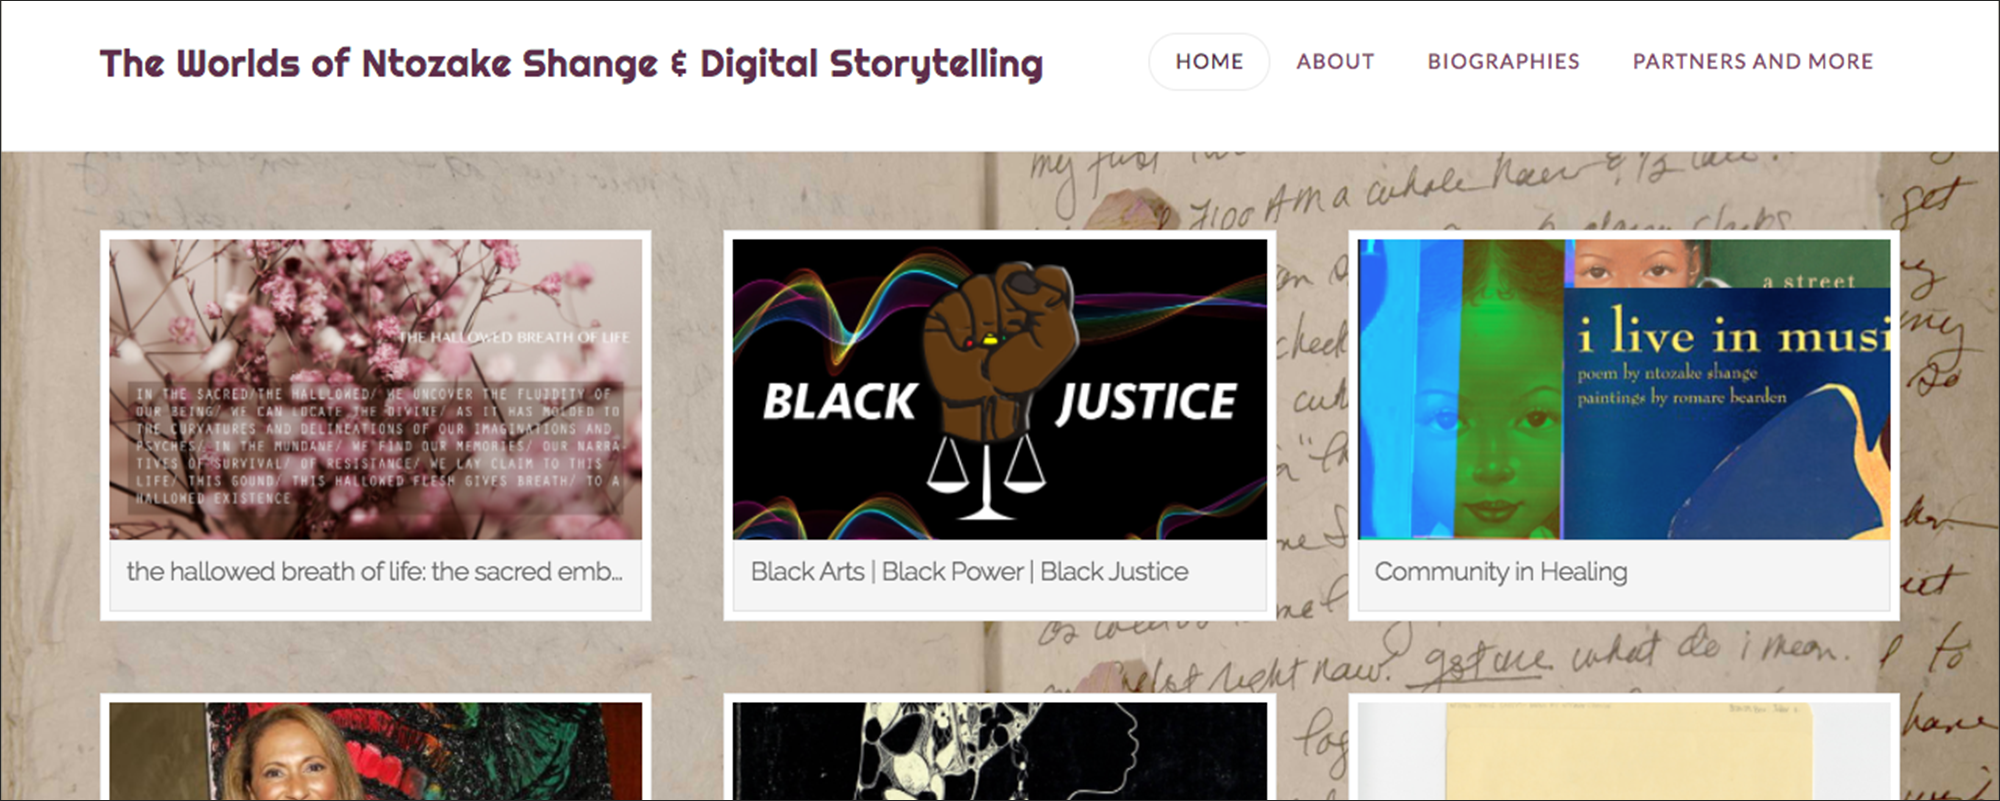 Screenshot of the course website, The Worlds of Ntozake Shange and Digital Storytelling 